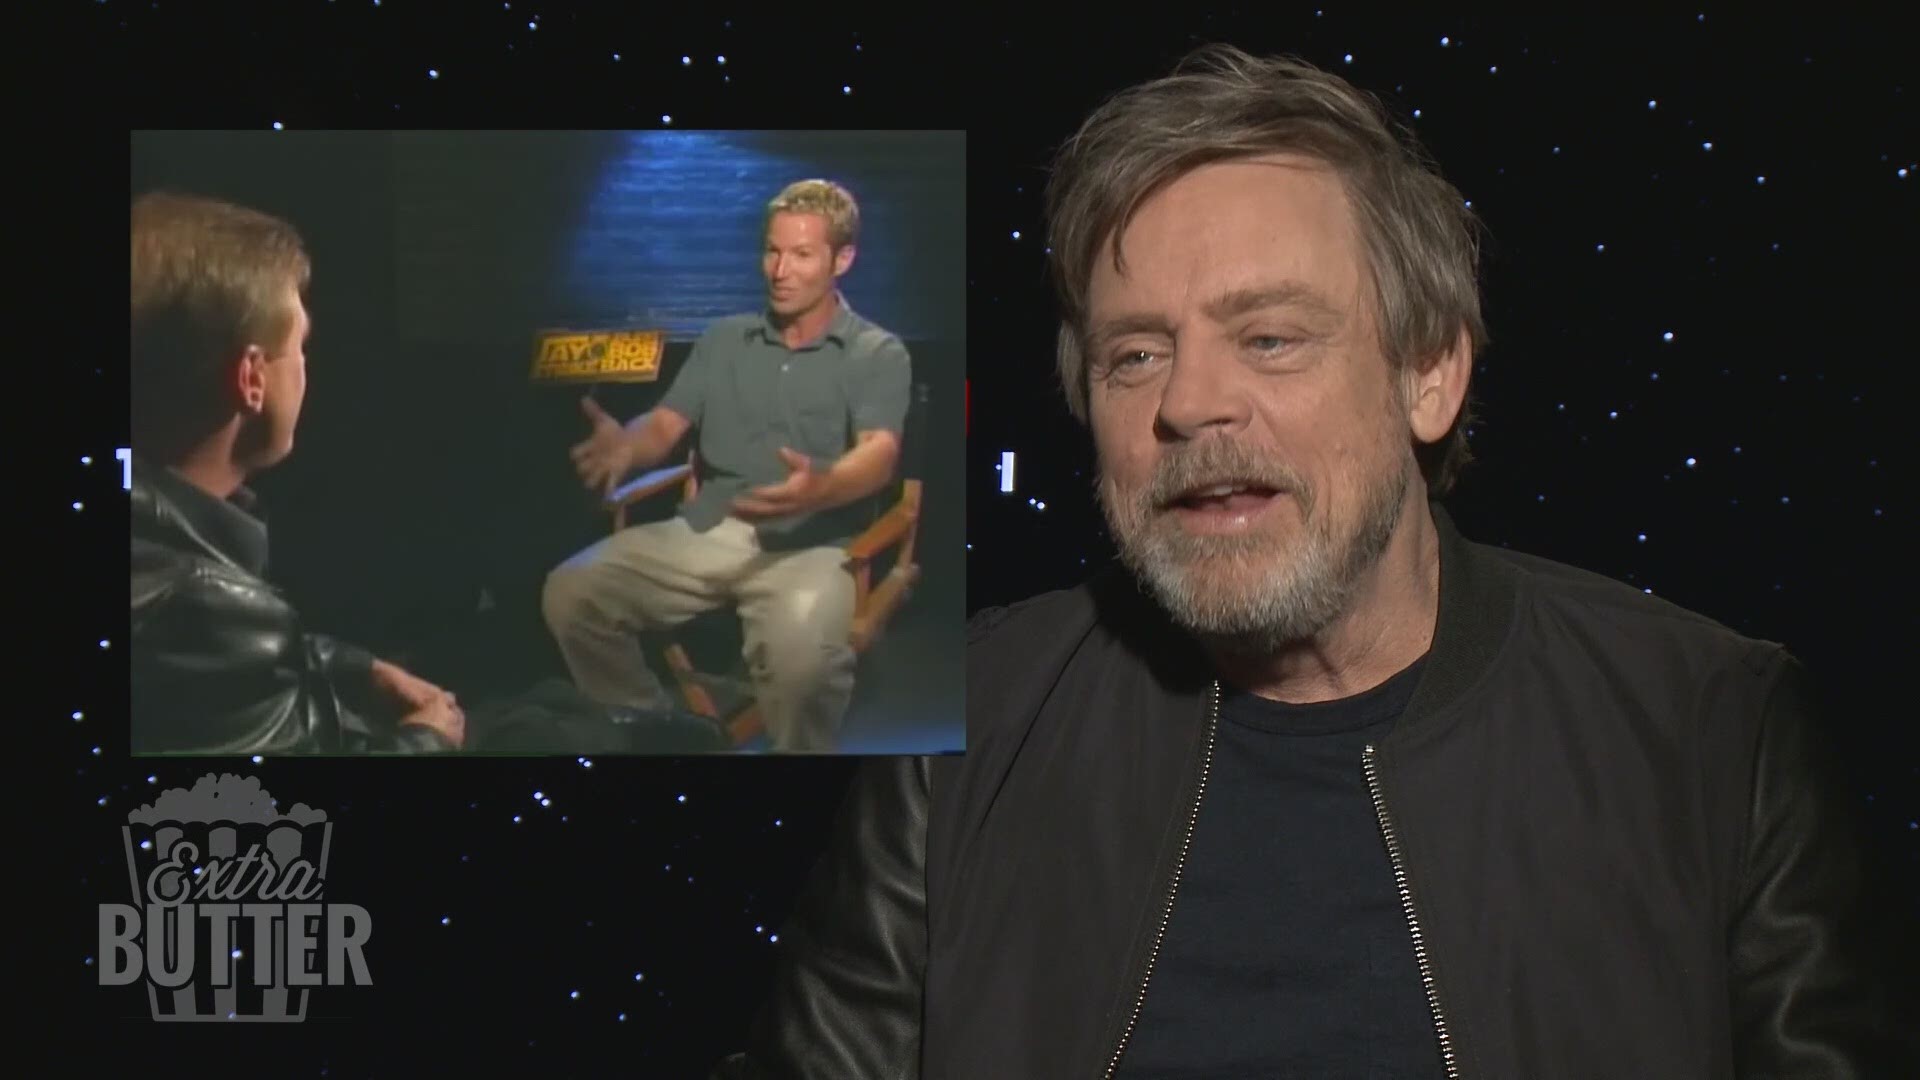 A tale of two Marks. Extra Butter's Mark S. Allen sits down with his Star Wars idol Mark Hamill. (Travel and accommodations paid for by Walt Disney Studios Motion Pictures).